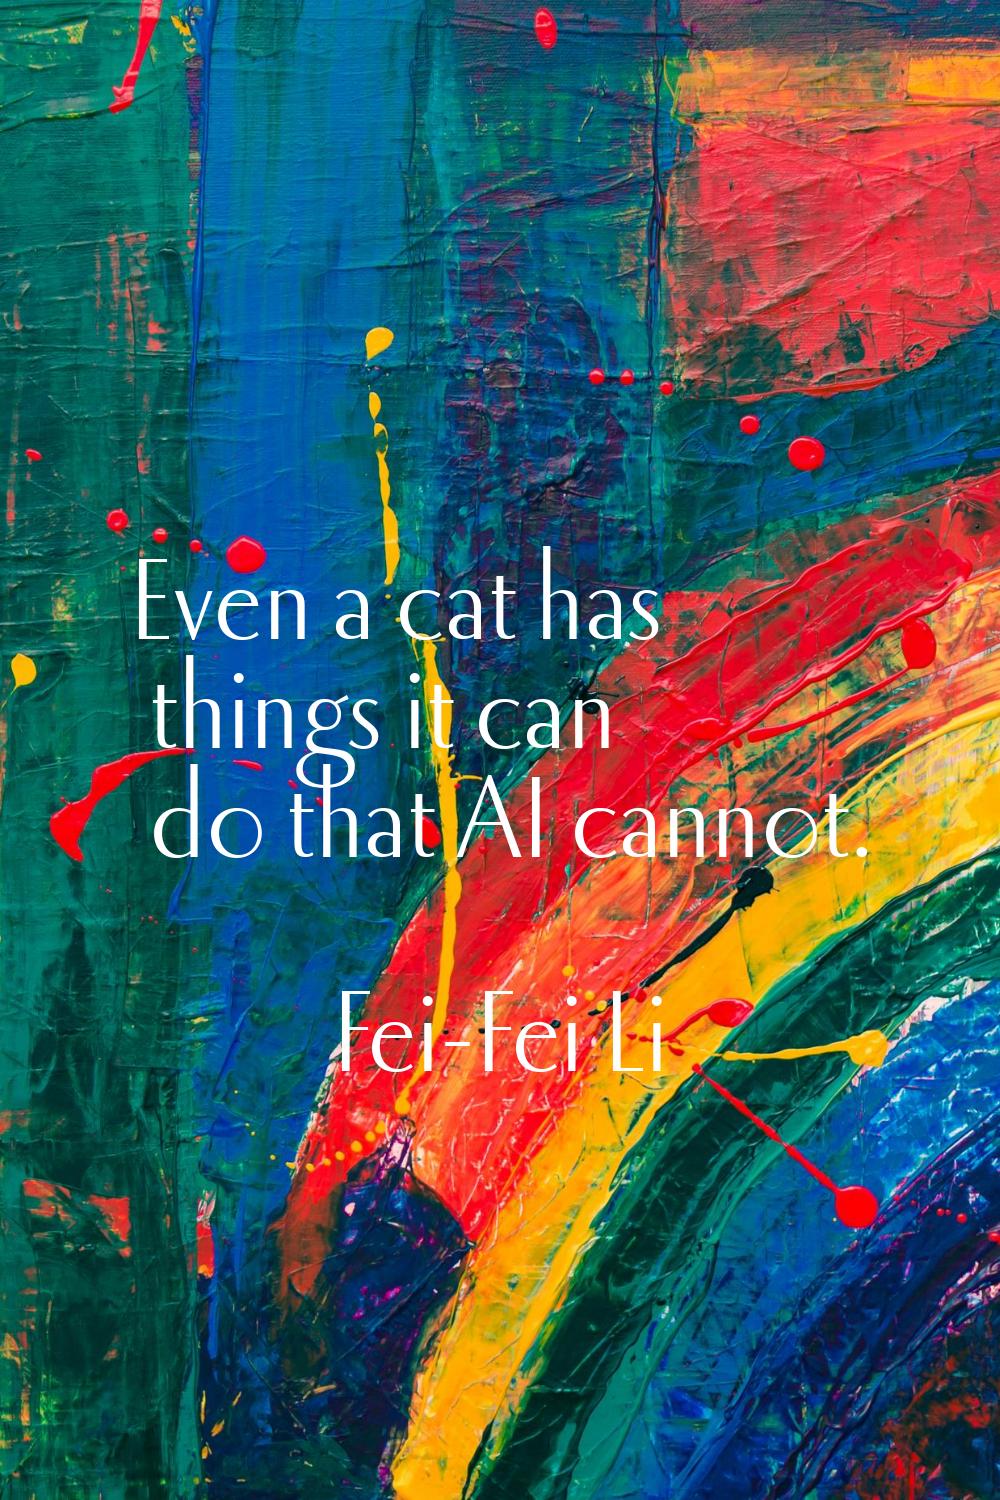 Even a cat has things it can do that AI cannot.